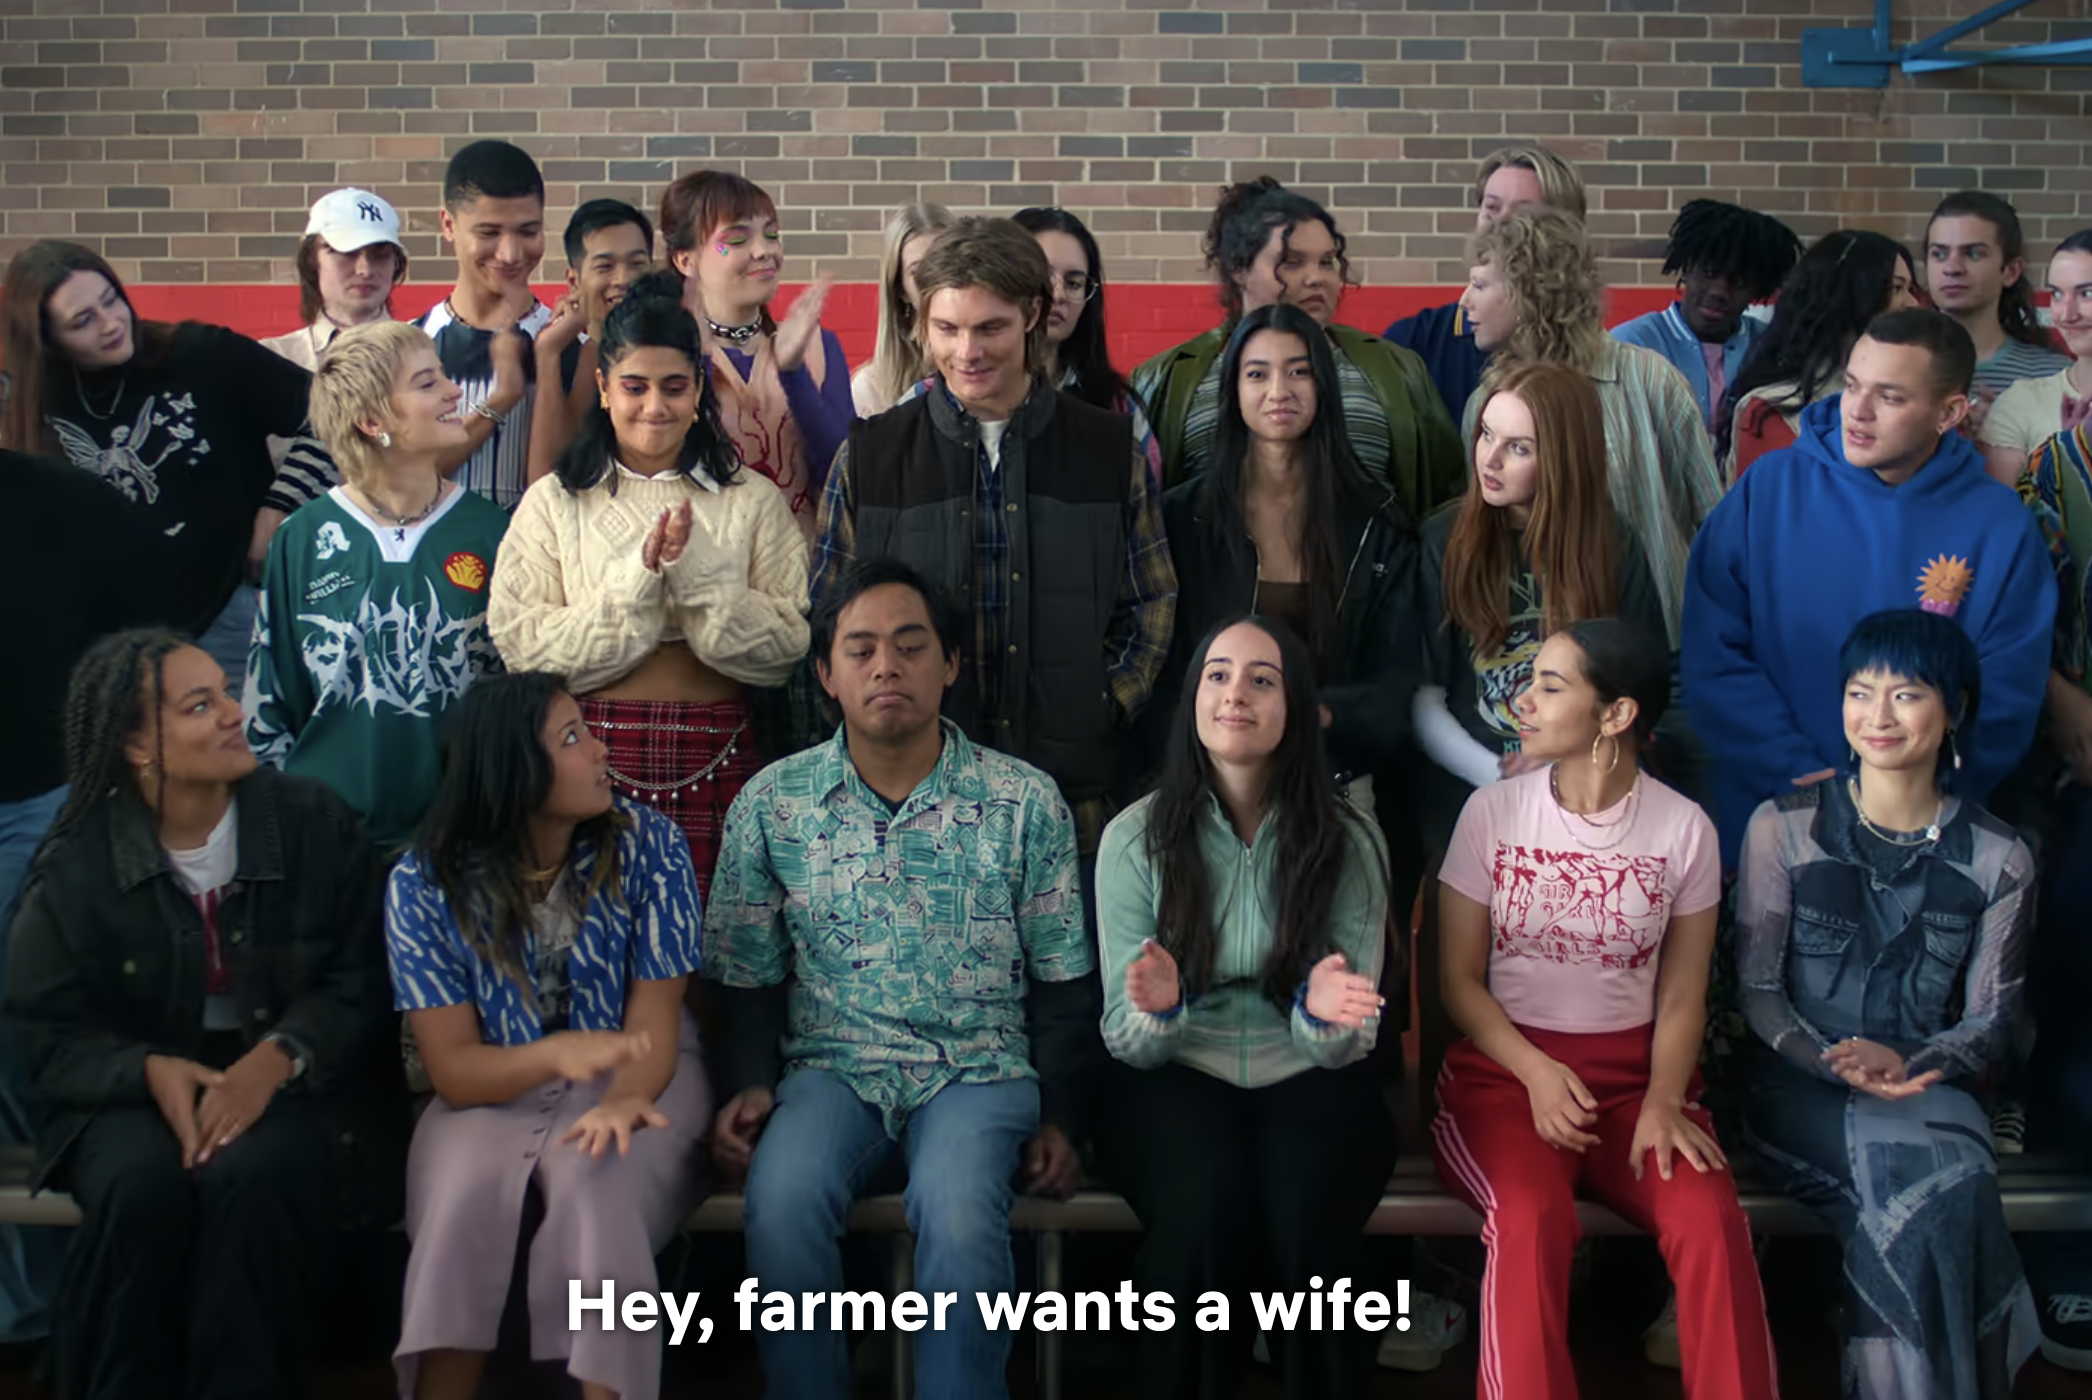 Group of diverse people surrounding a central figure, expressions suggesting excitement or cheer. Text on image: &quot;Hey, farmer wants a wife!&quot;